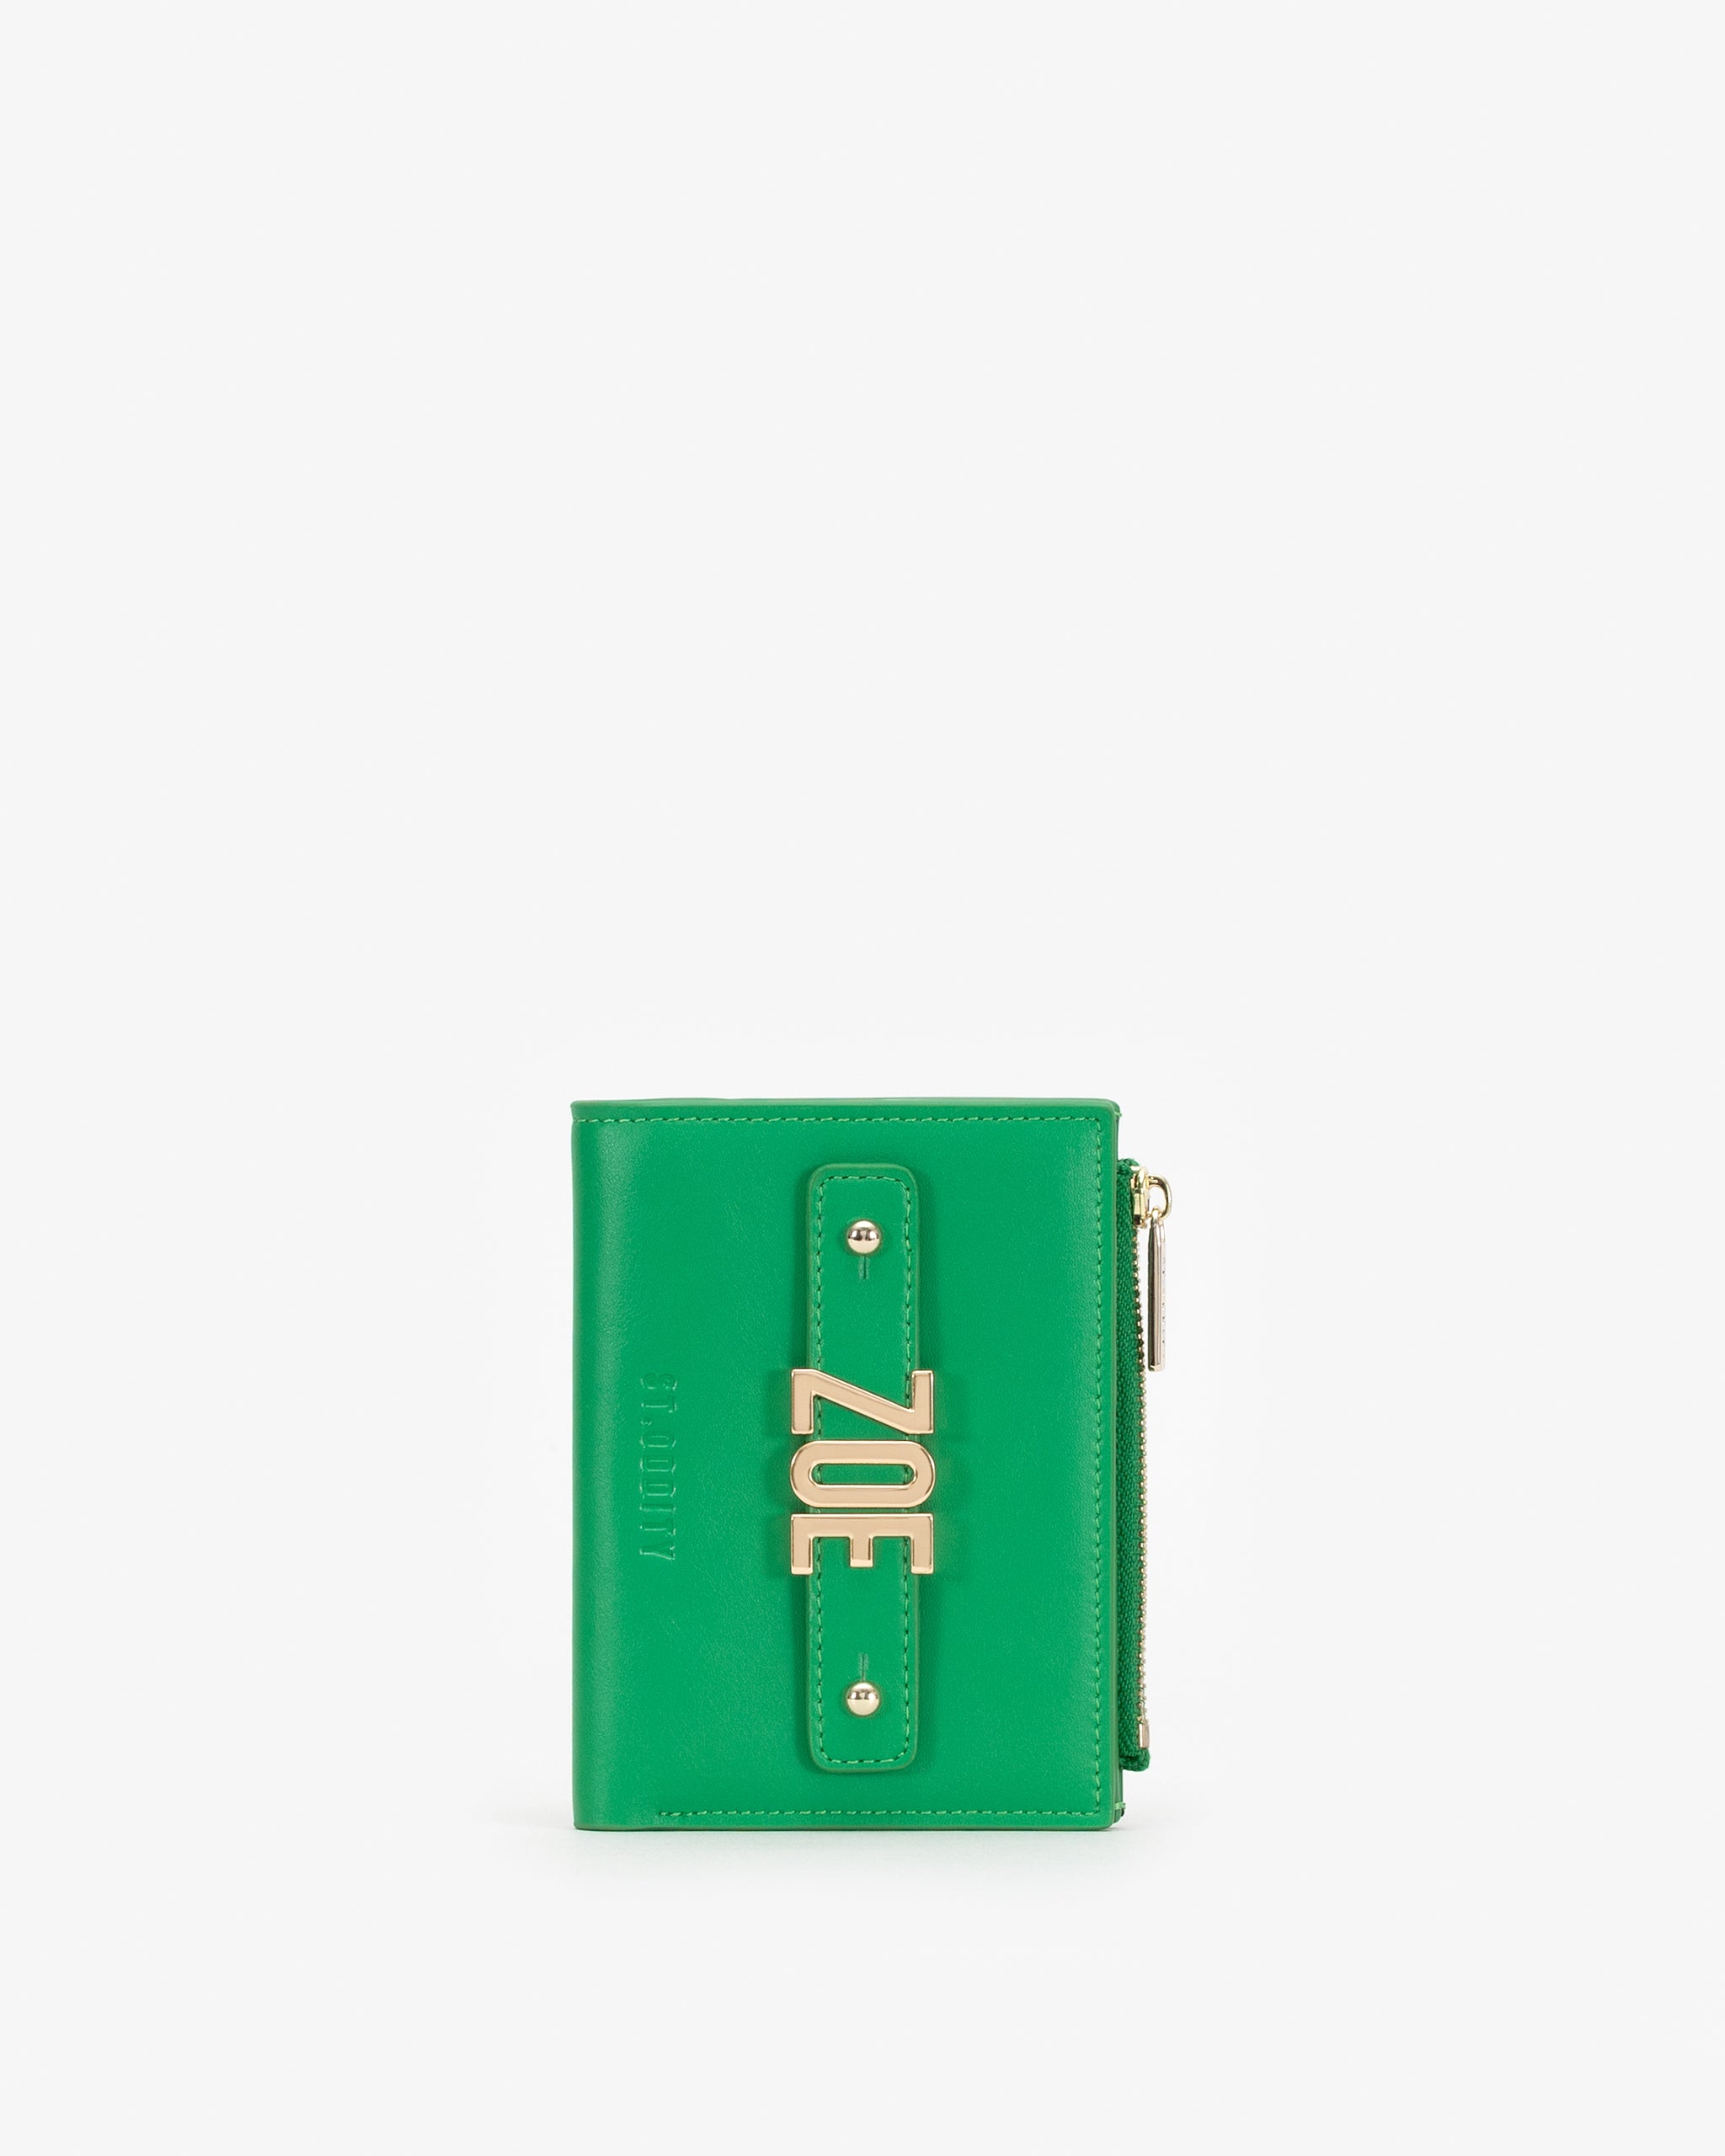 Pre-order (Mid-May): Wallet in Grass Green with Personalised Hardware